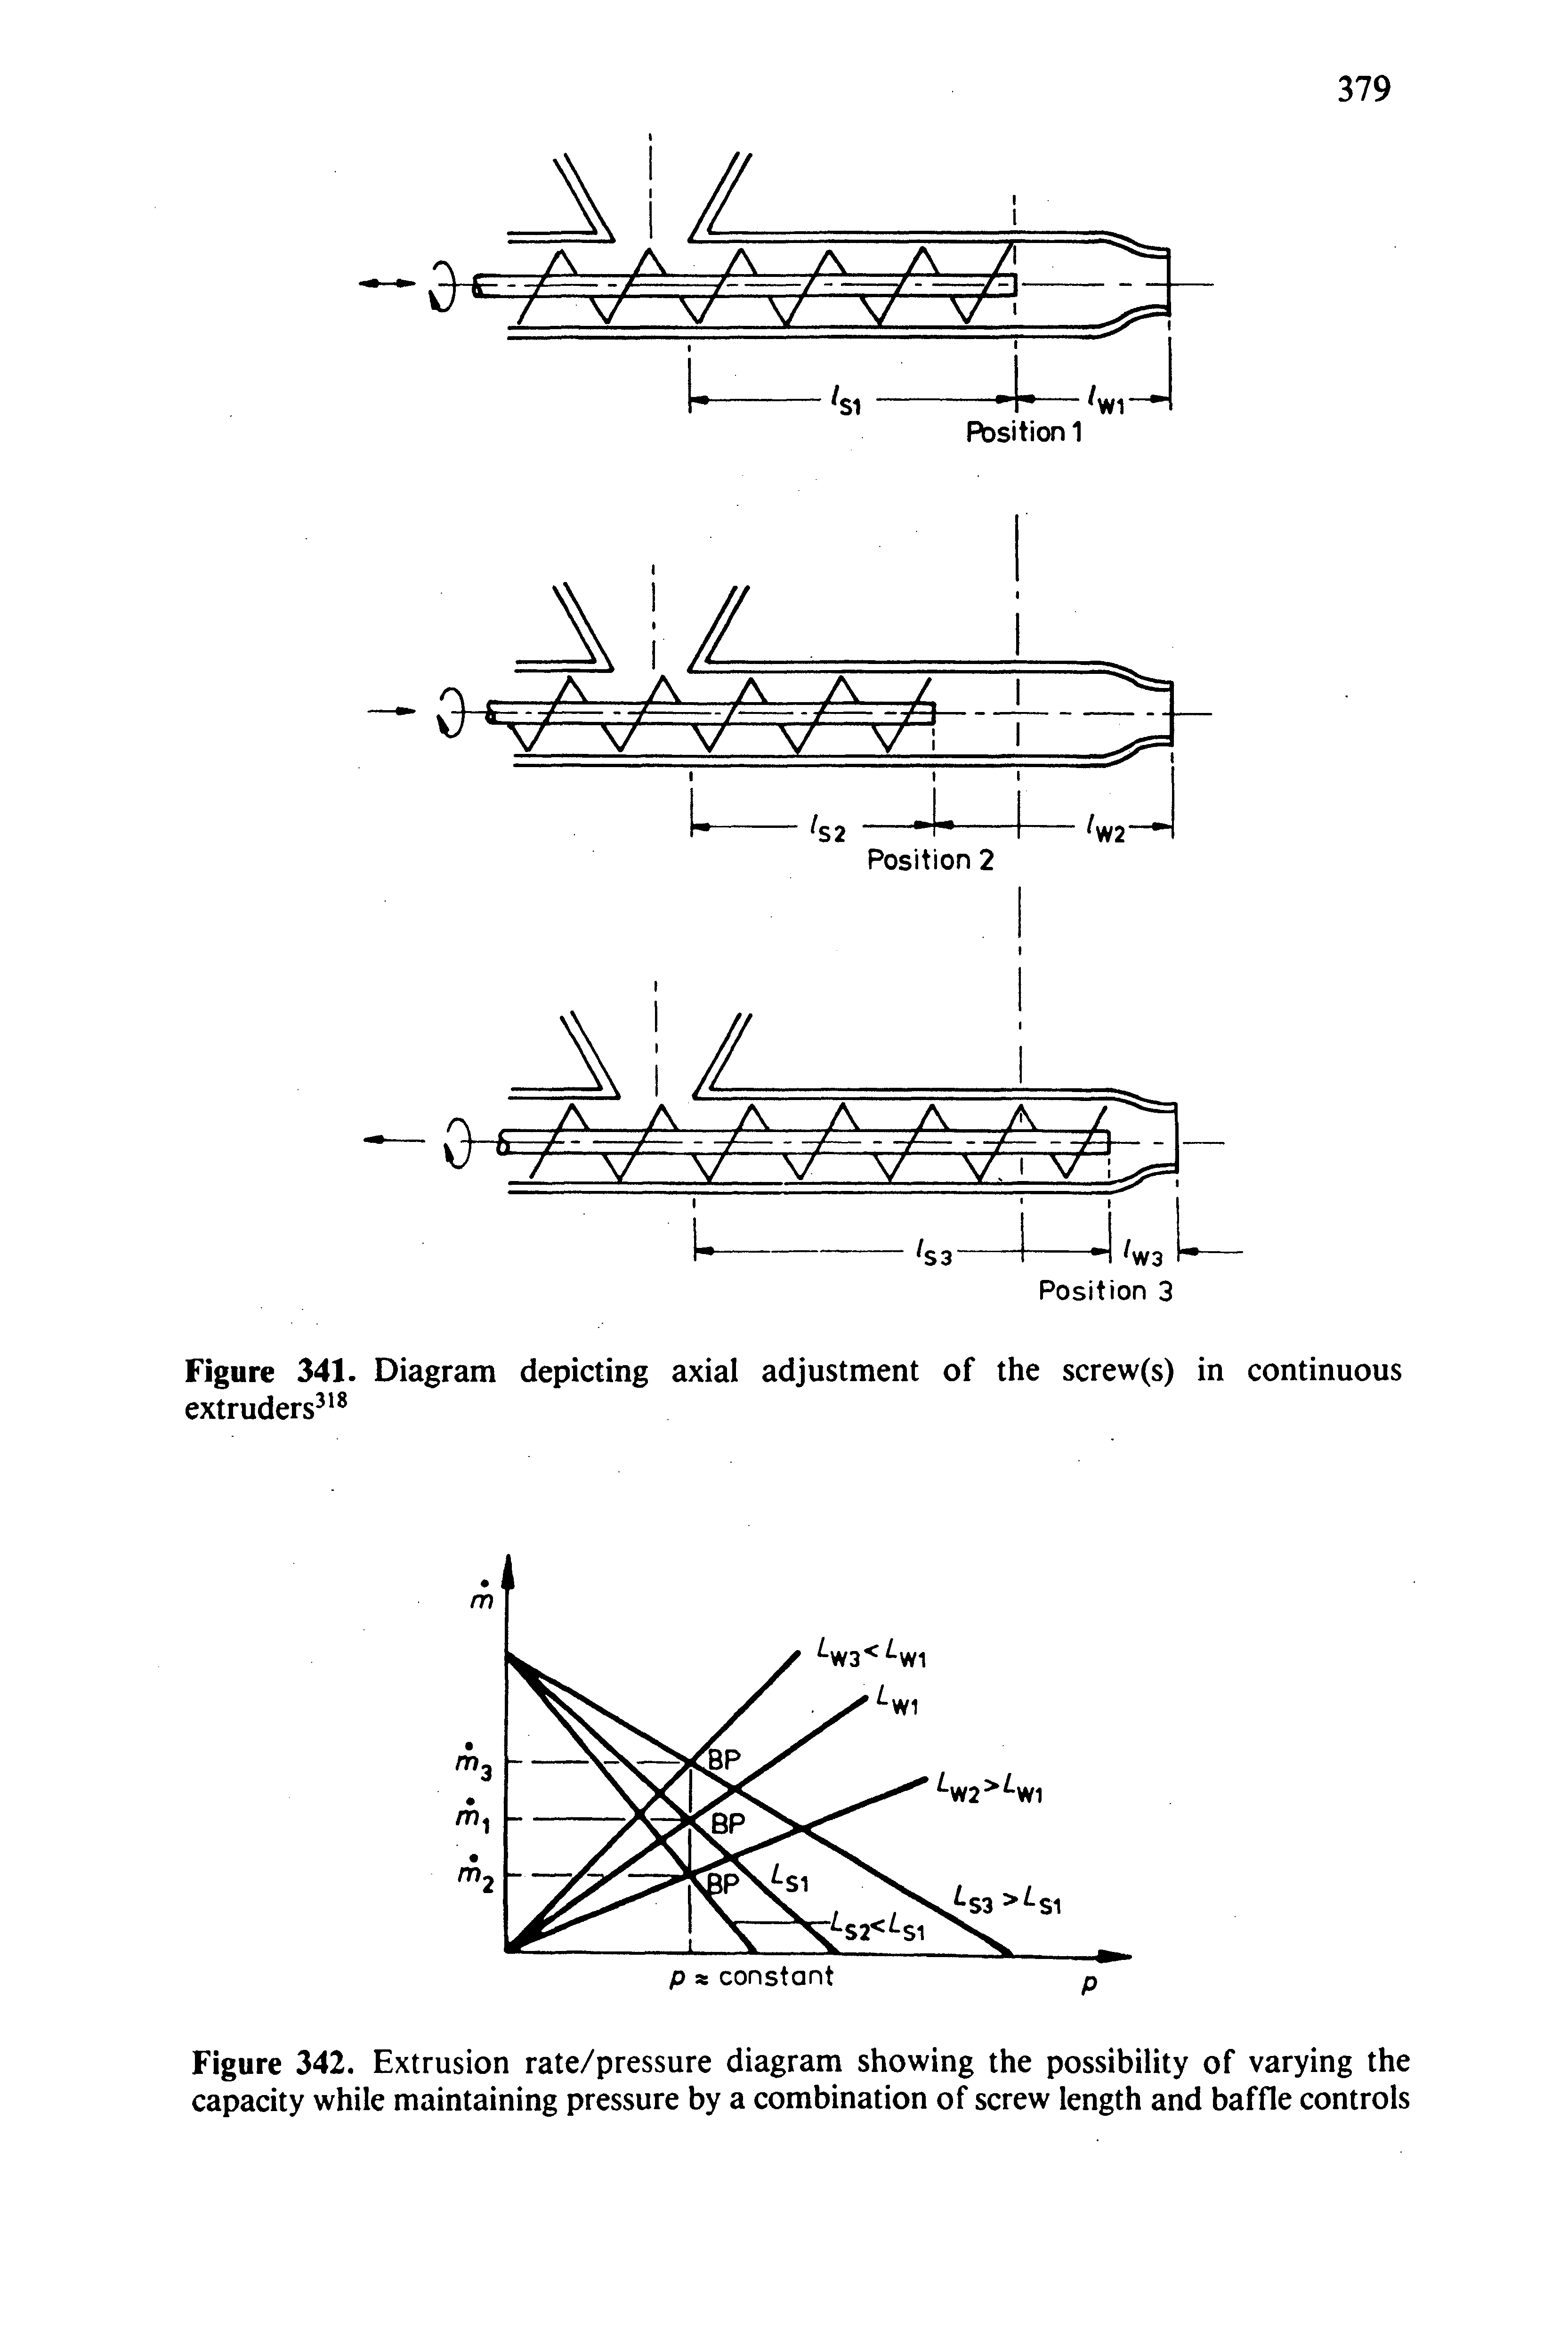 Figure 342. Extrusion rate/pressure diagram showing the possibility of varying the capacity while maintaining pressure by a combination of screw length and baffle controls...